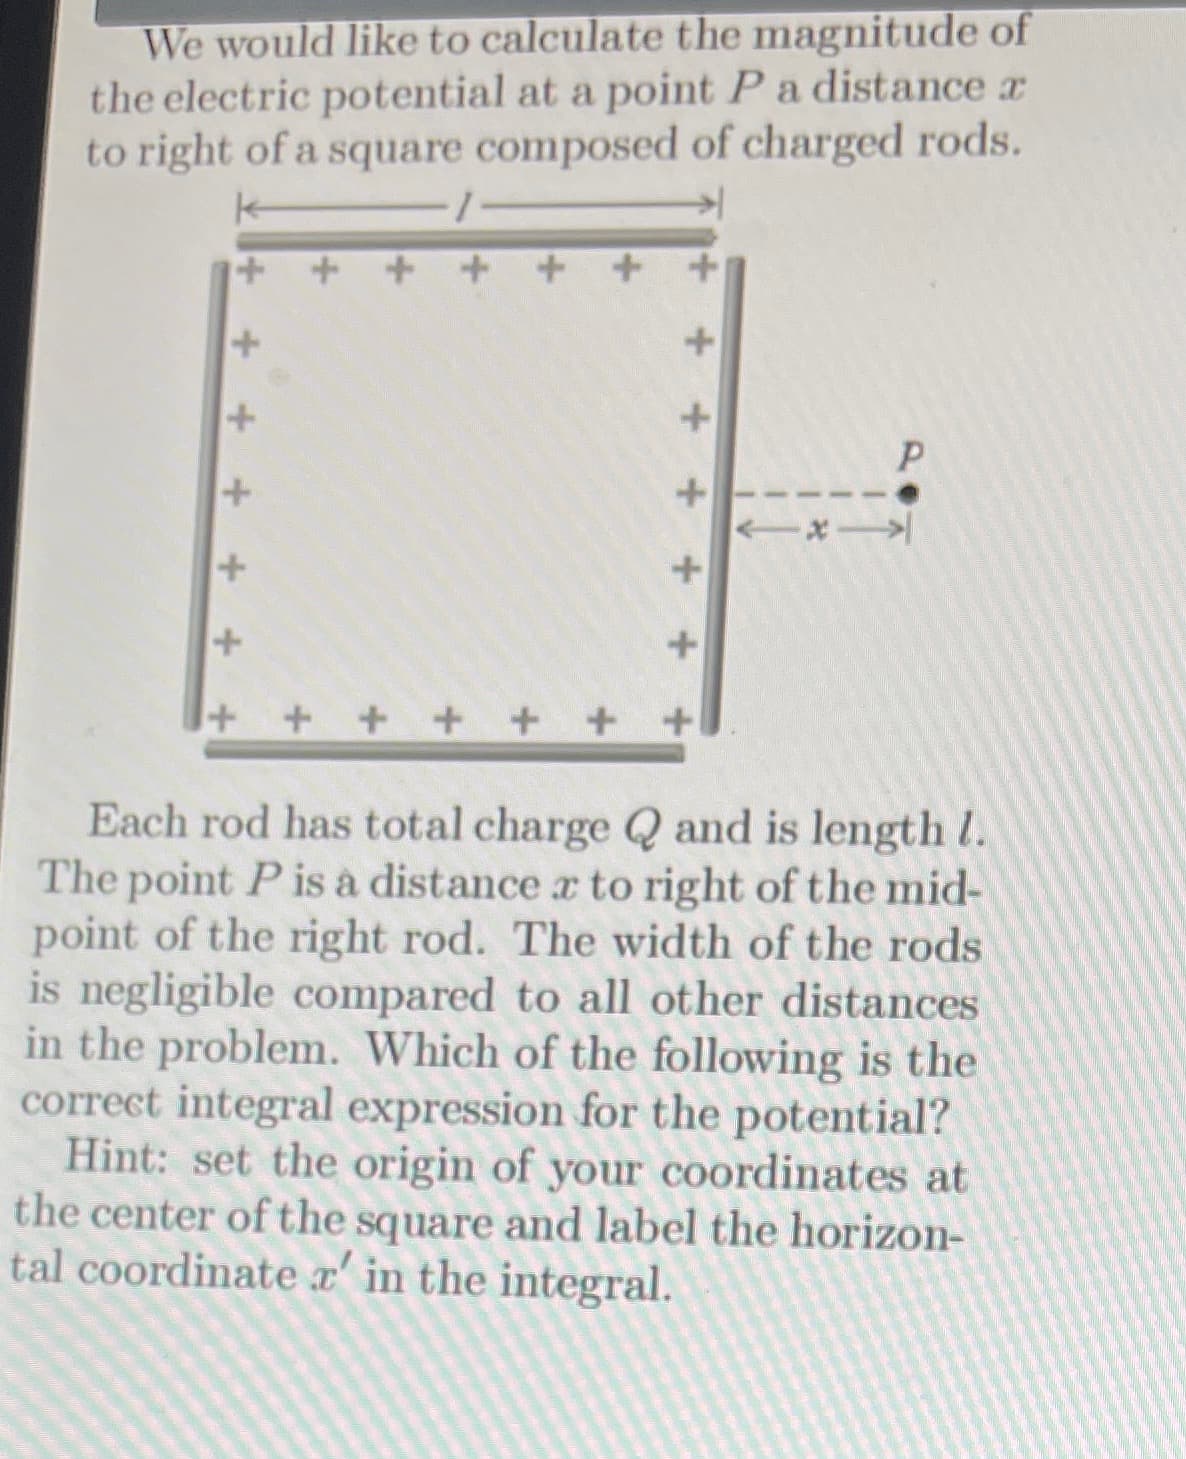 We would like to calculate the magnitude of
the electric potential at a point Pa distance a
to right of a square composed of charged rods.
+ +++ + + +
Each rod has total charge Q and is length I.
The point P is à distance a to right of the mid-
point of the right rod. The width of the rods
is negligible compared to all other distances
in the problem. Which of the following is the
correct integral expression for the potential?
Hint: set the origin of your coordinates at
the center of the square and label the horizon-
tal coordinate x' in the integral.
